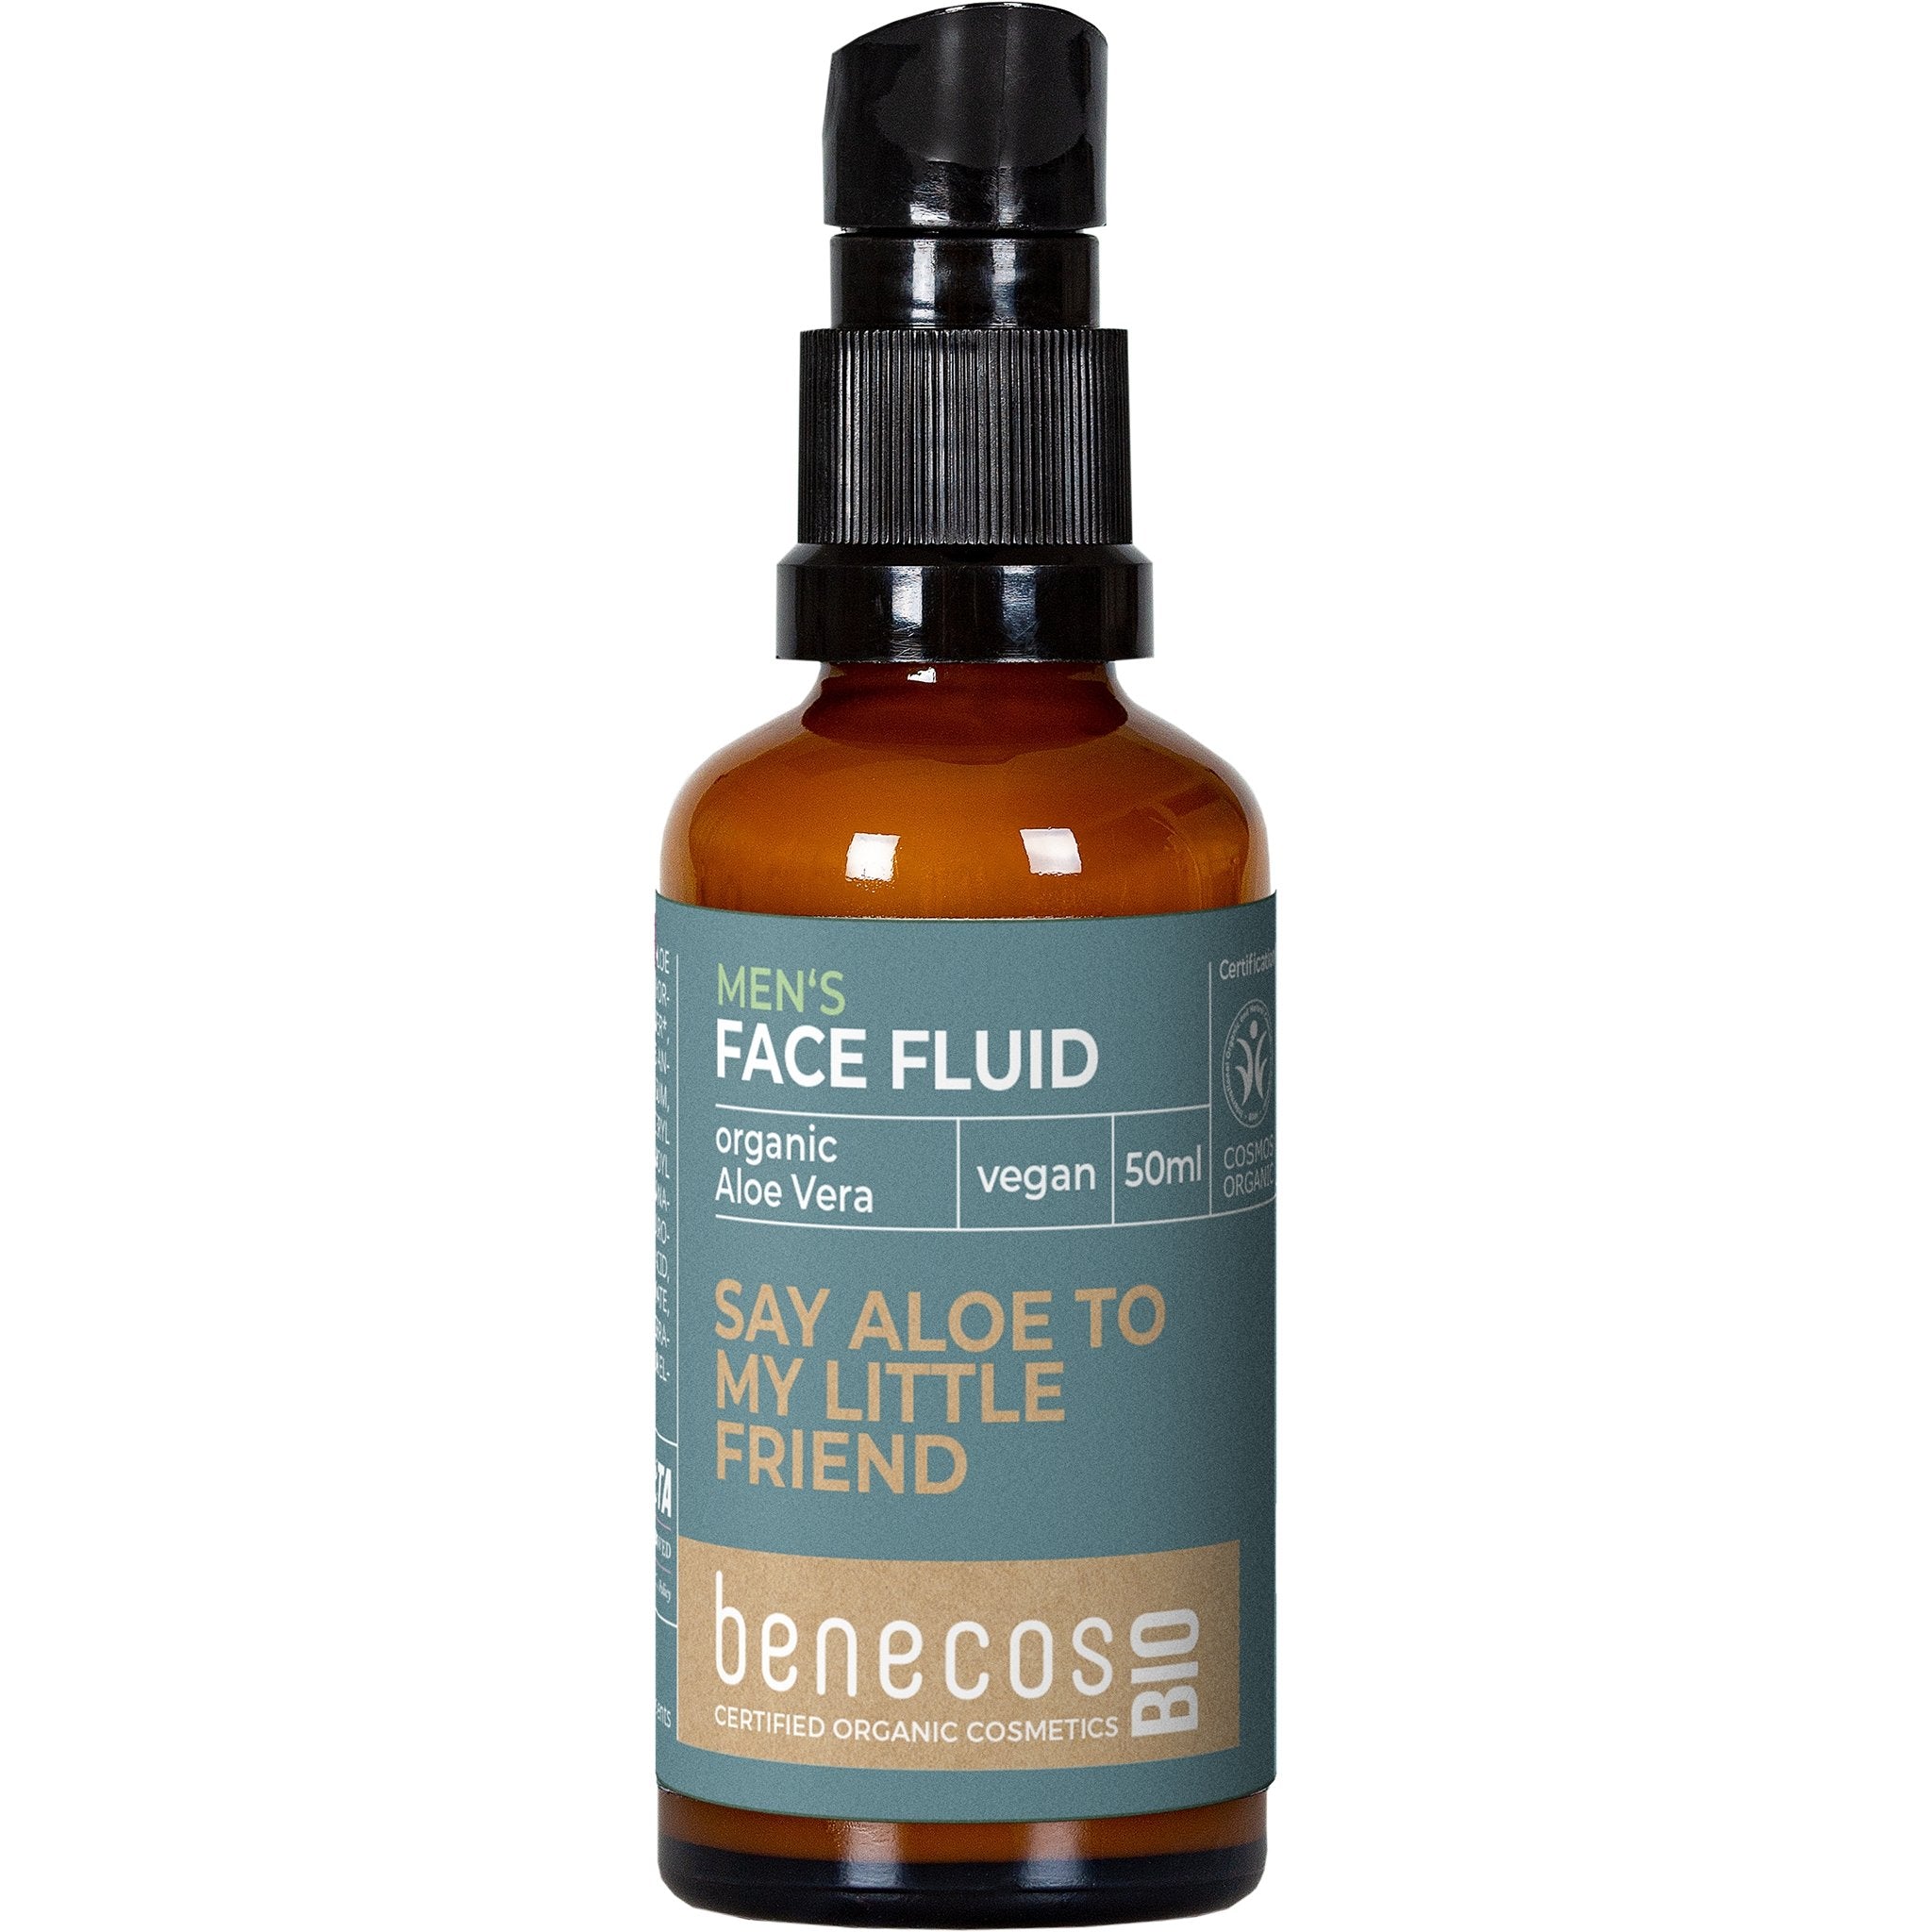 NEW Say Aloe to My Litte Friend - Face Fluid for Men - mypure.co.uk